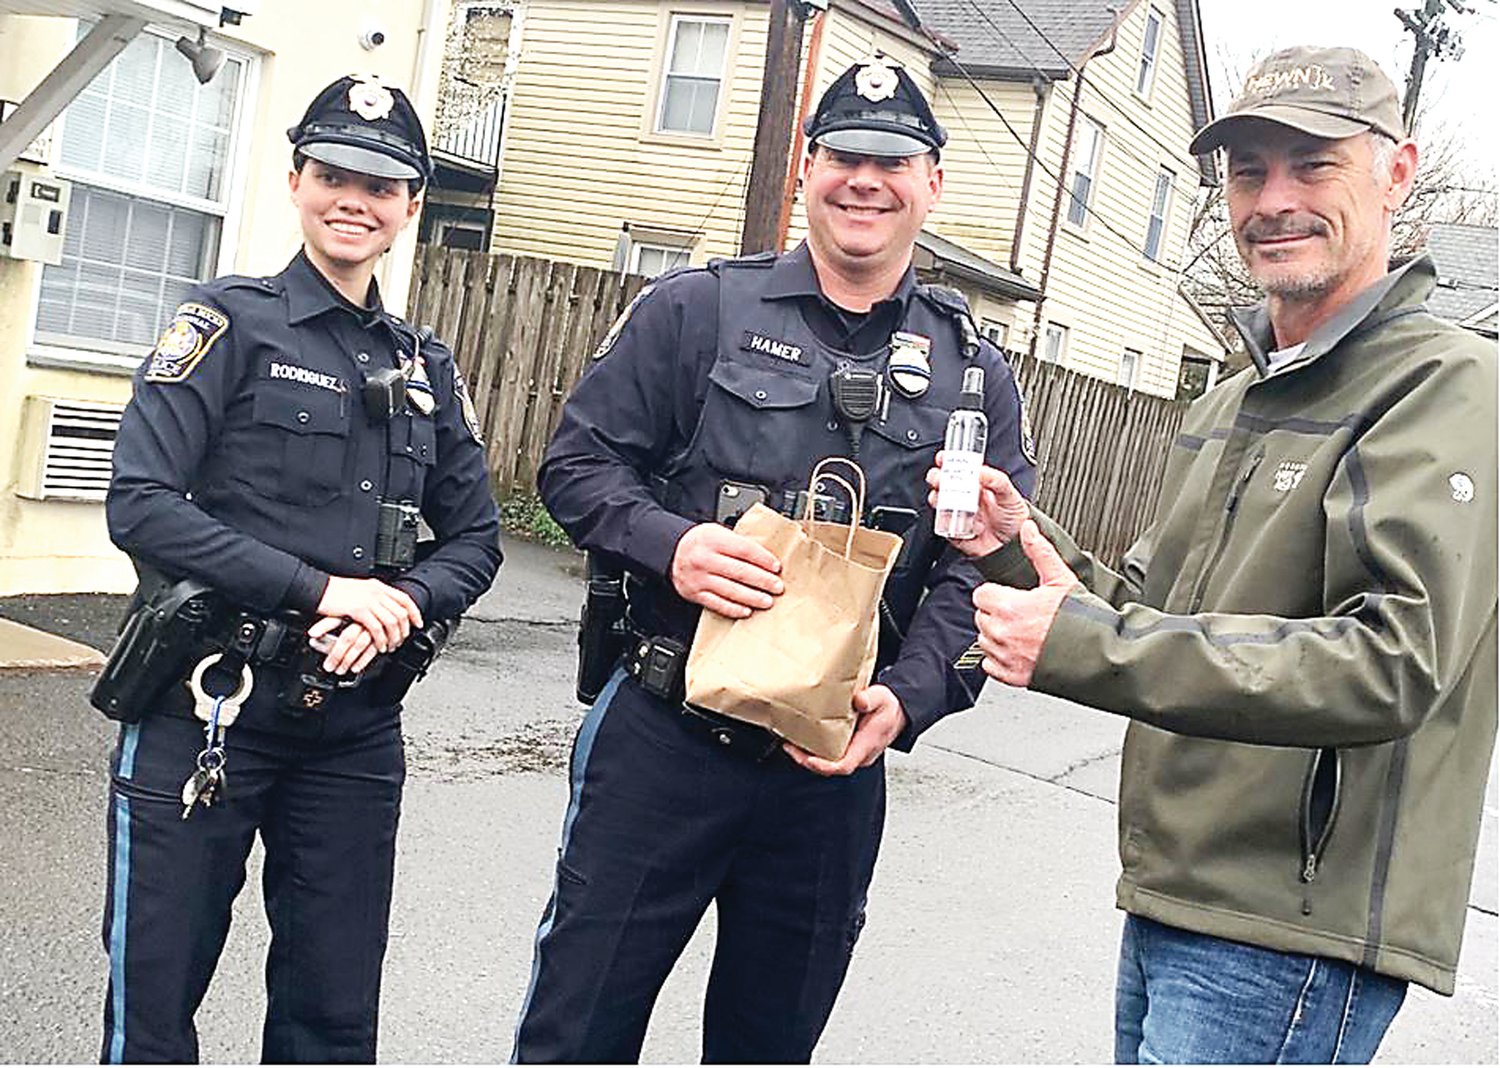 Officers Rodriguez and Hammer from the Central Bucks Regional Police Department pick up hand sanitizer from Sean Tracy of Hewn Spirits in Pipersville.